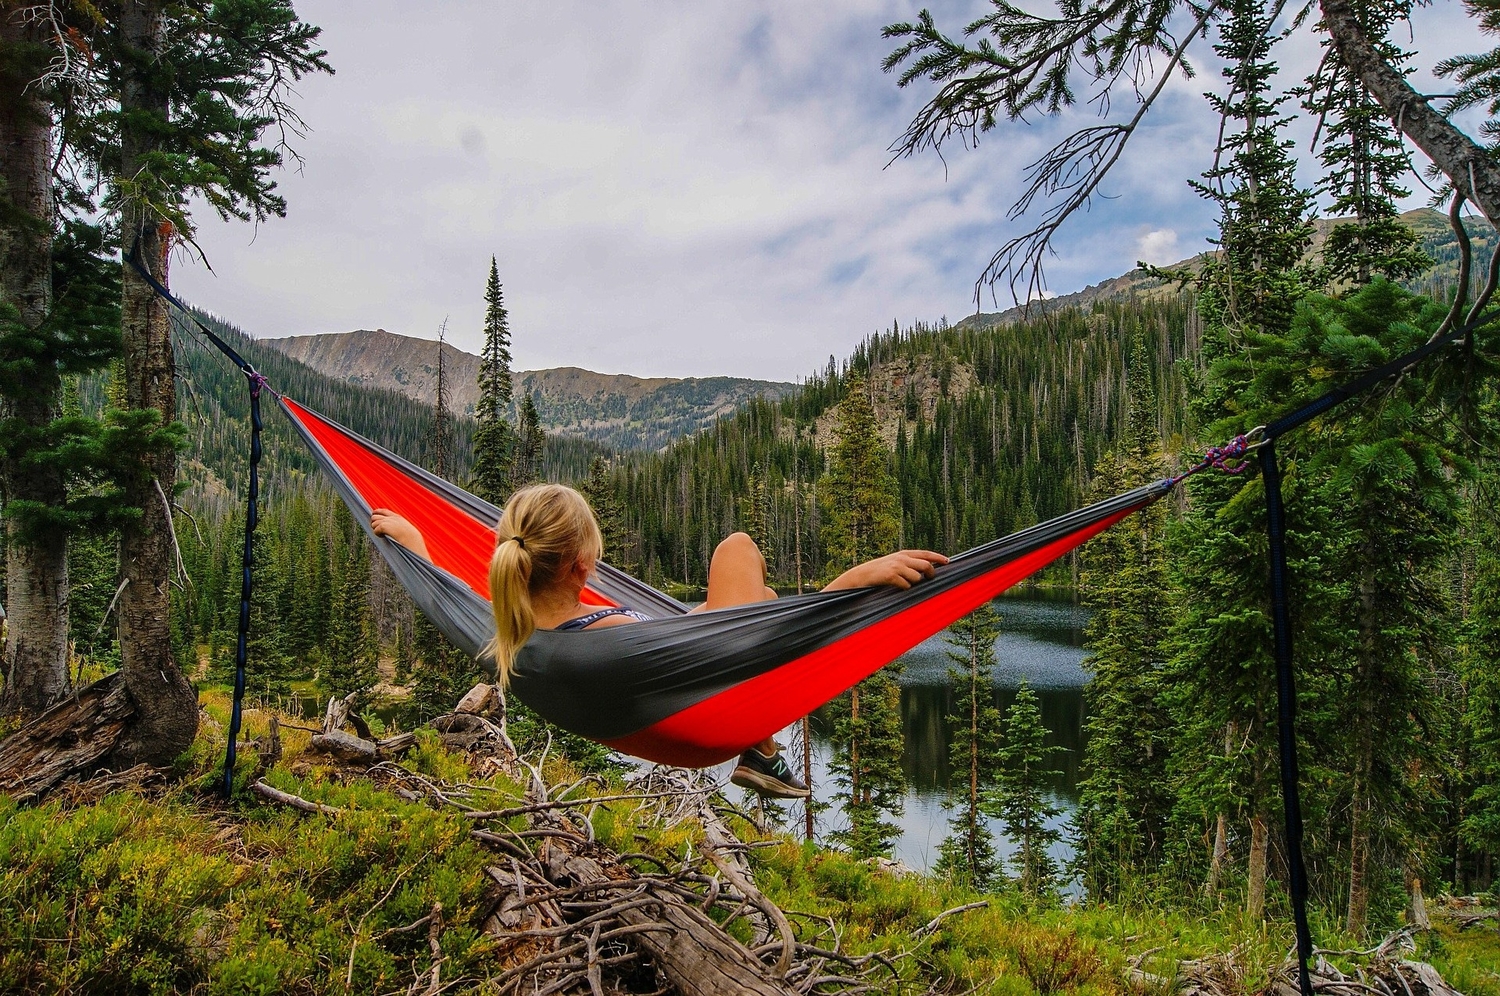 Camping hammocks will free you from tent tyranny